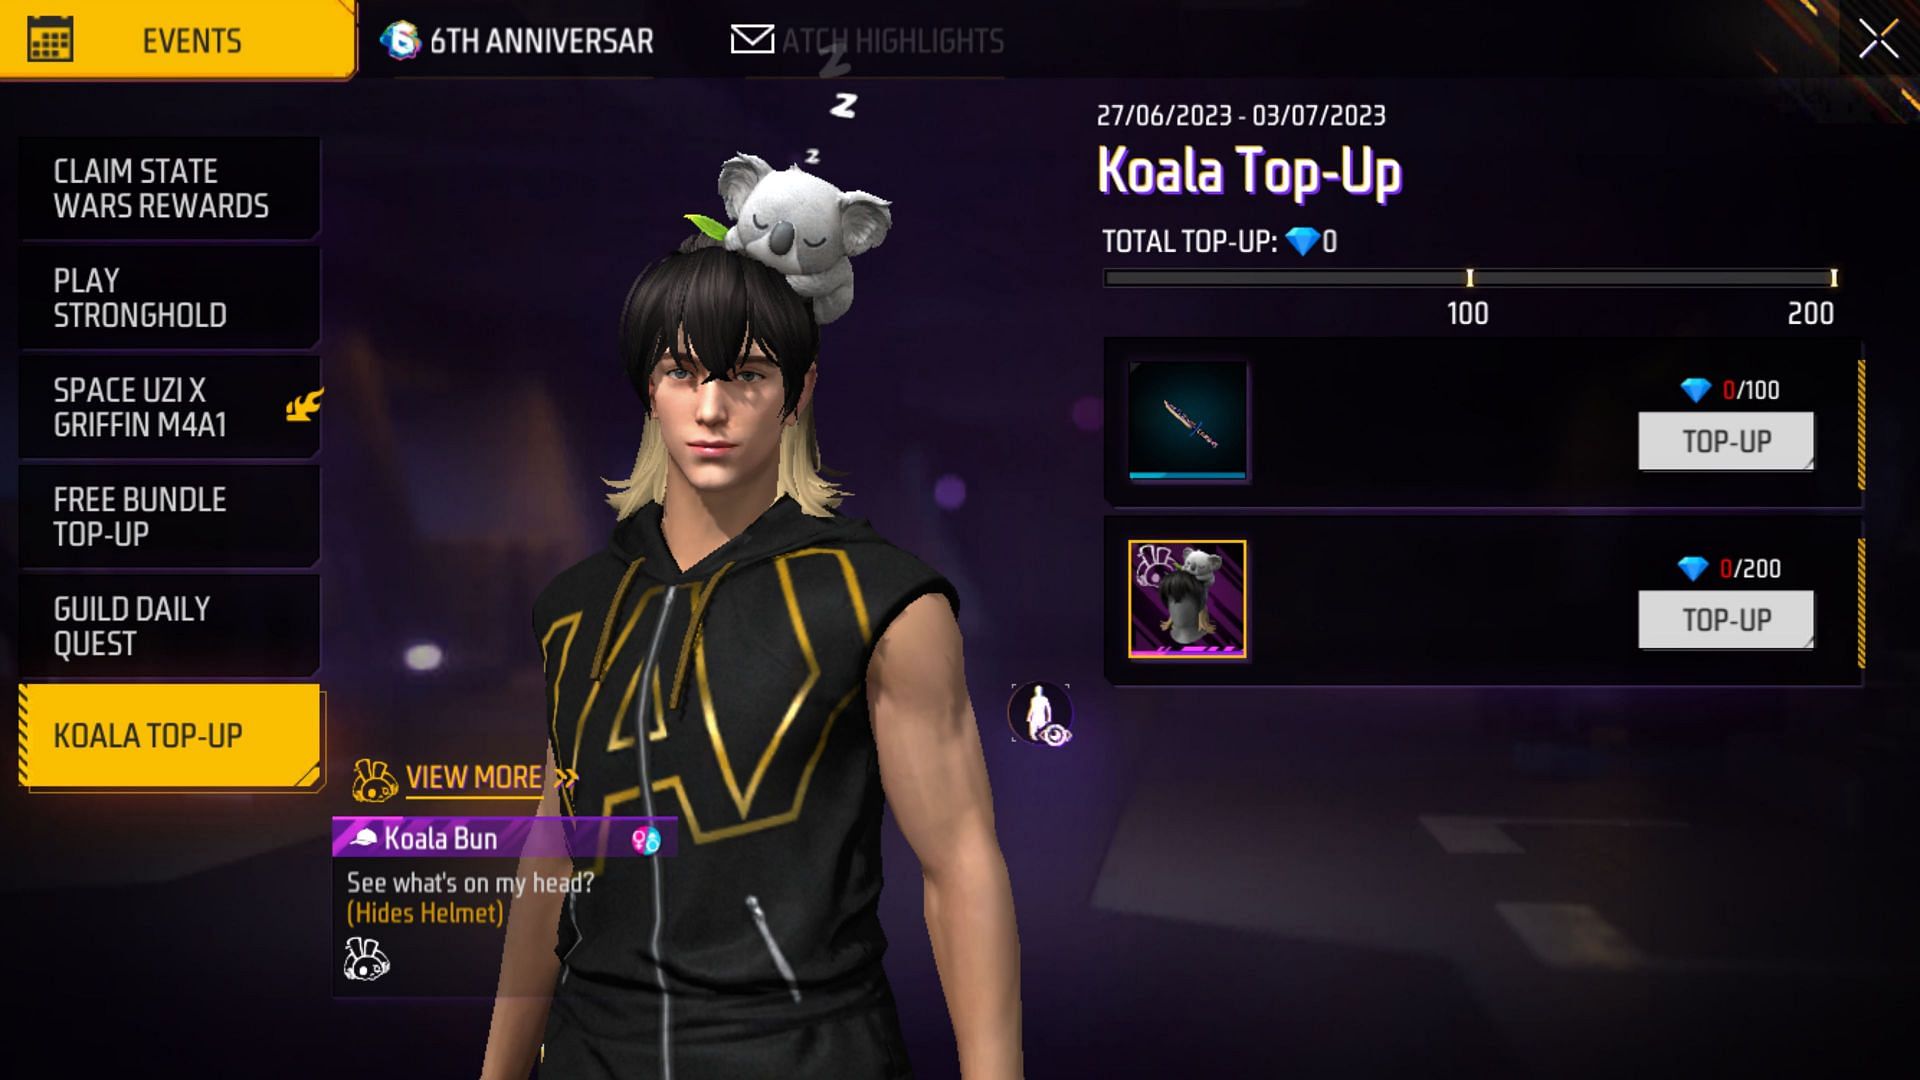 Koala Top-Up event was added to the game on June 27, 2023 (Image via Garena)